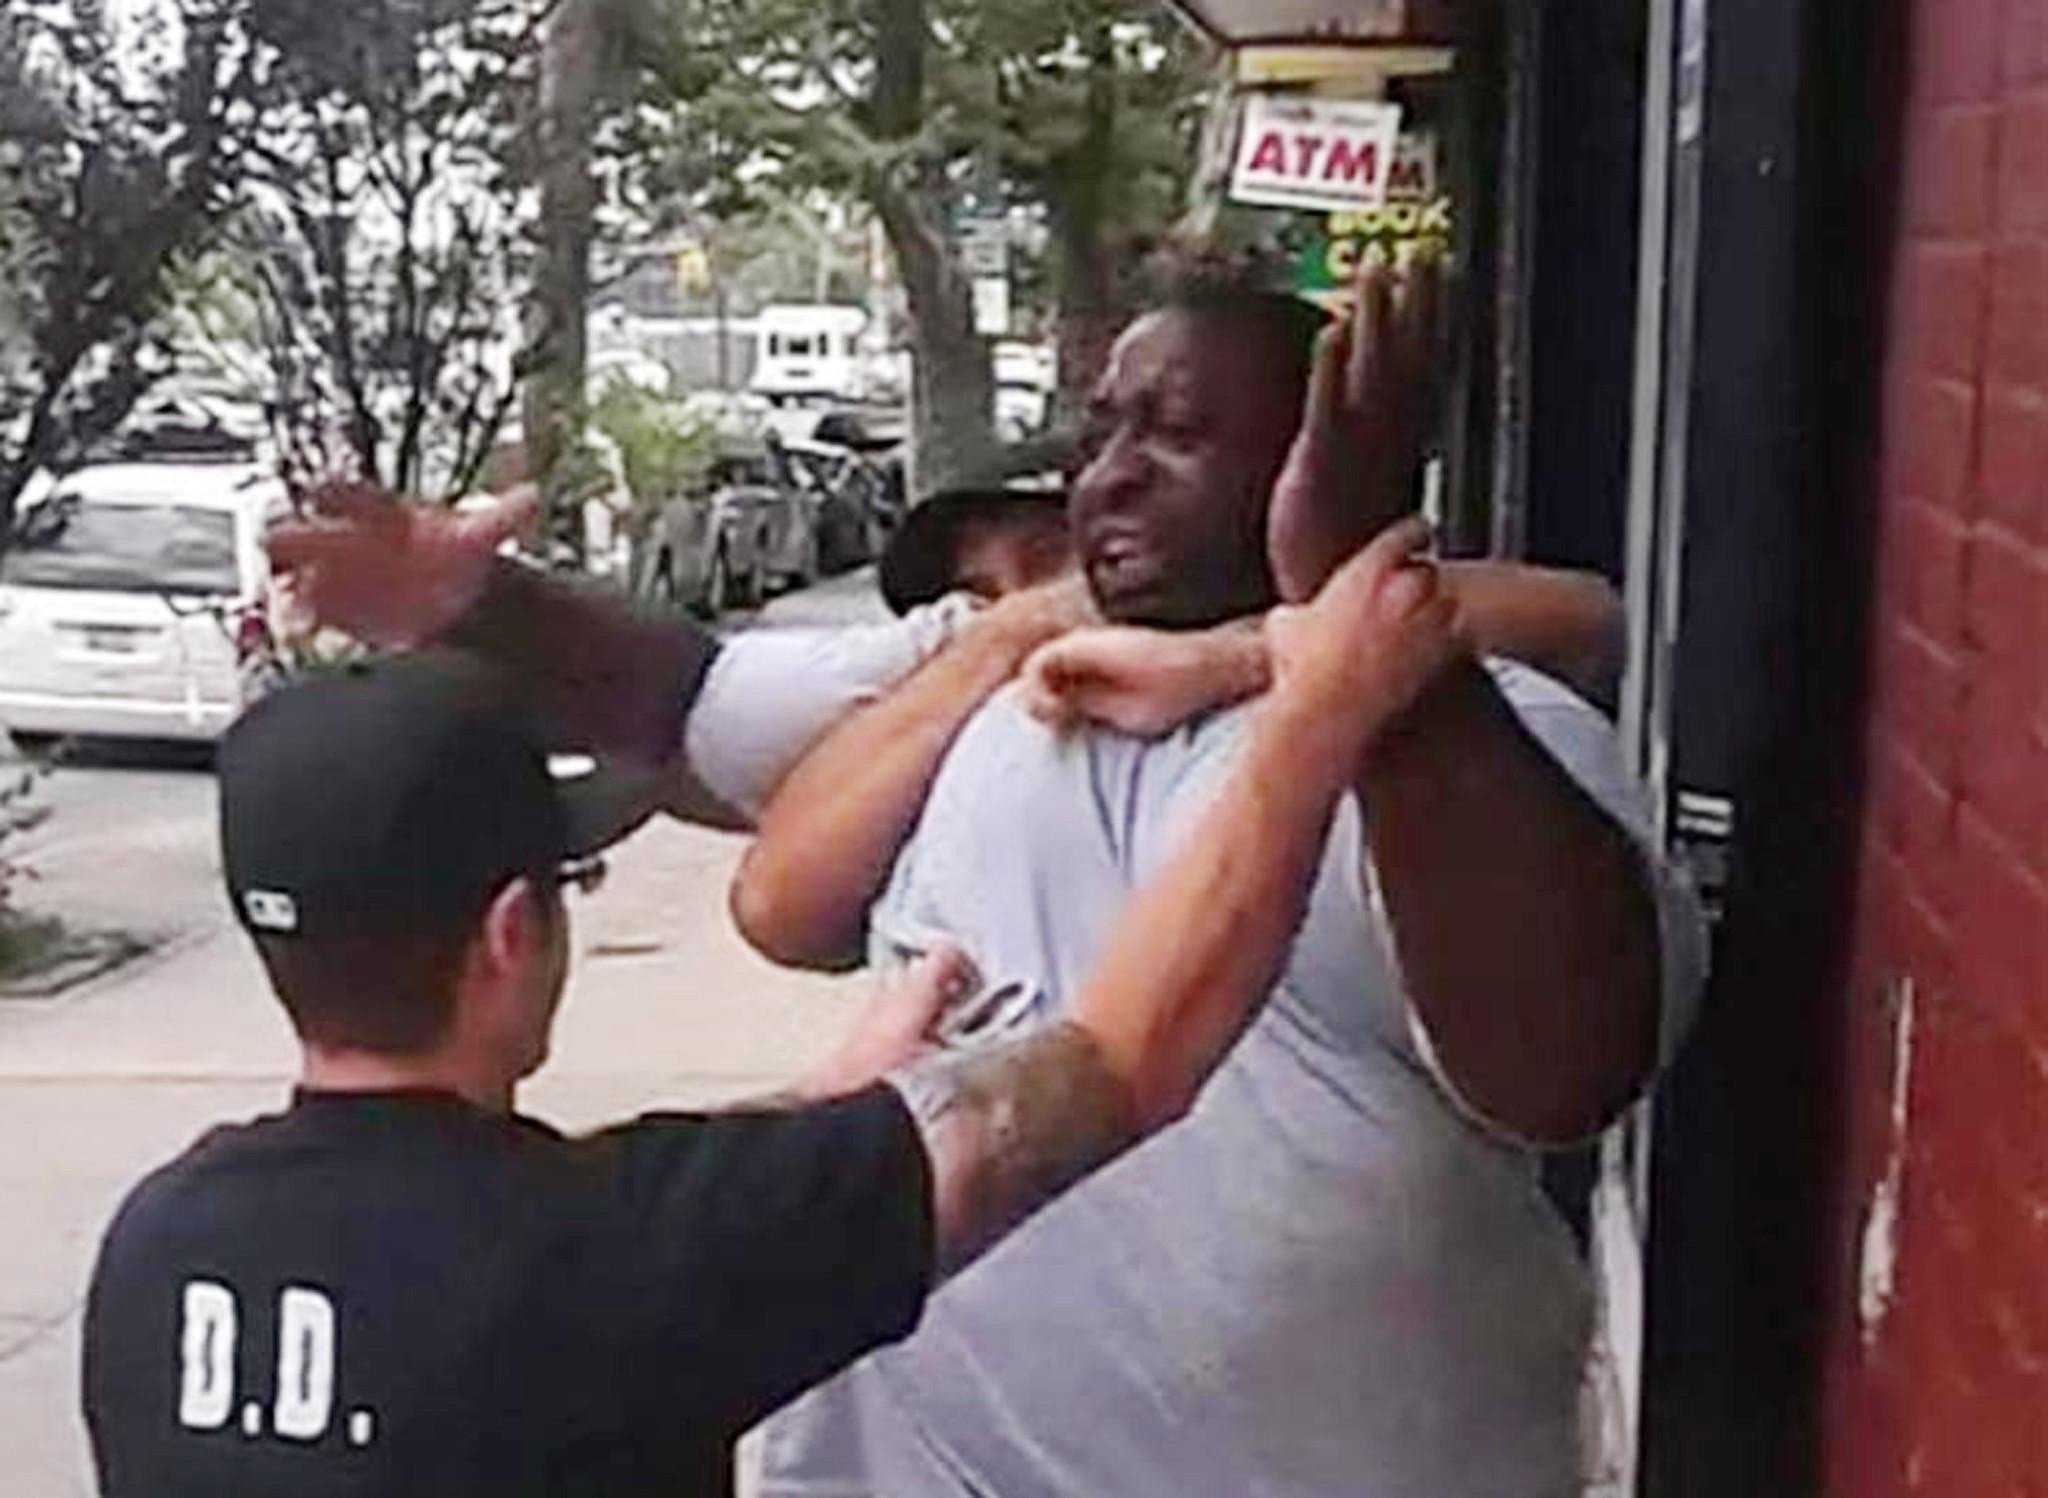 udtale Banquet Genbruge NYPD cop admits filing report after Eric Garner chokehold death claiming  his sale of loose cigarettes was a felony was 'total mistake' – New York  Daily News